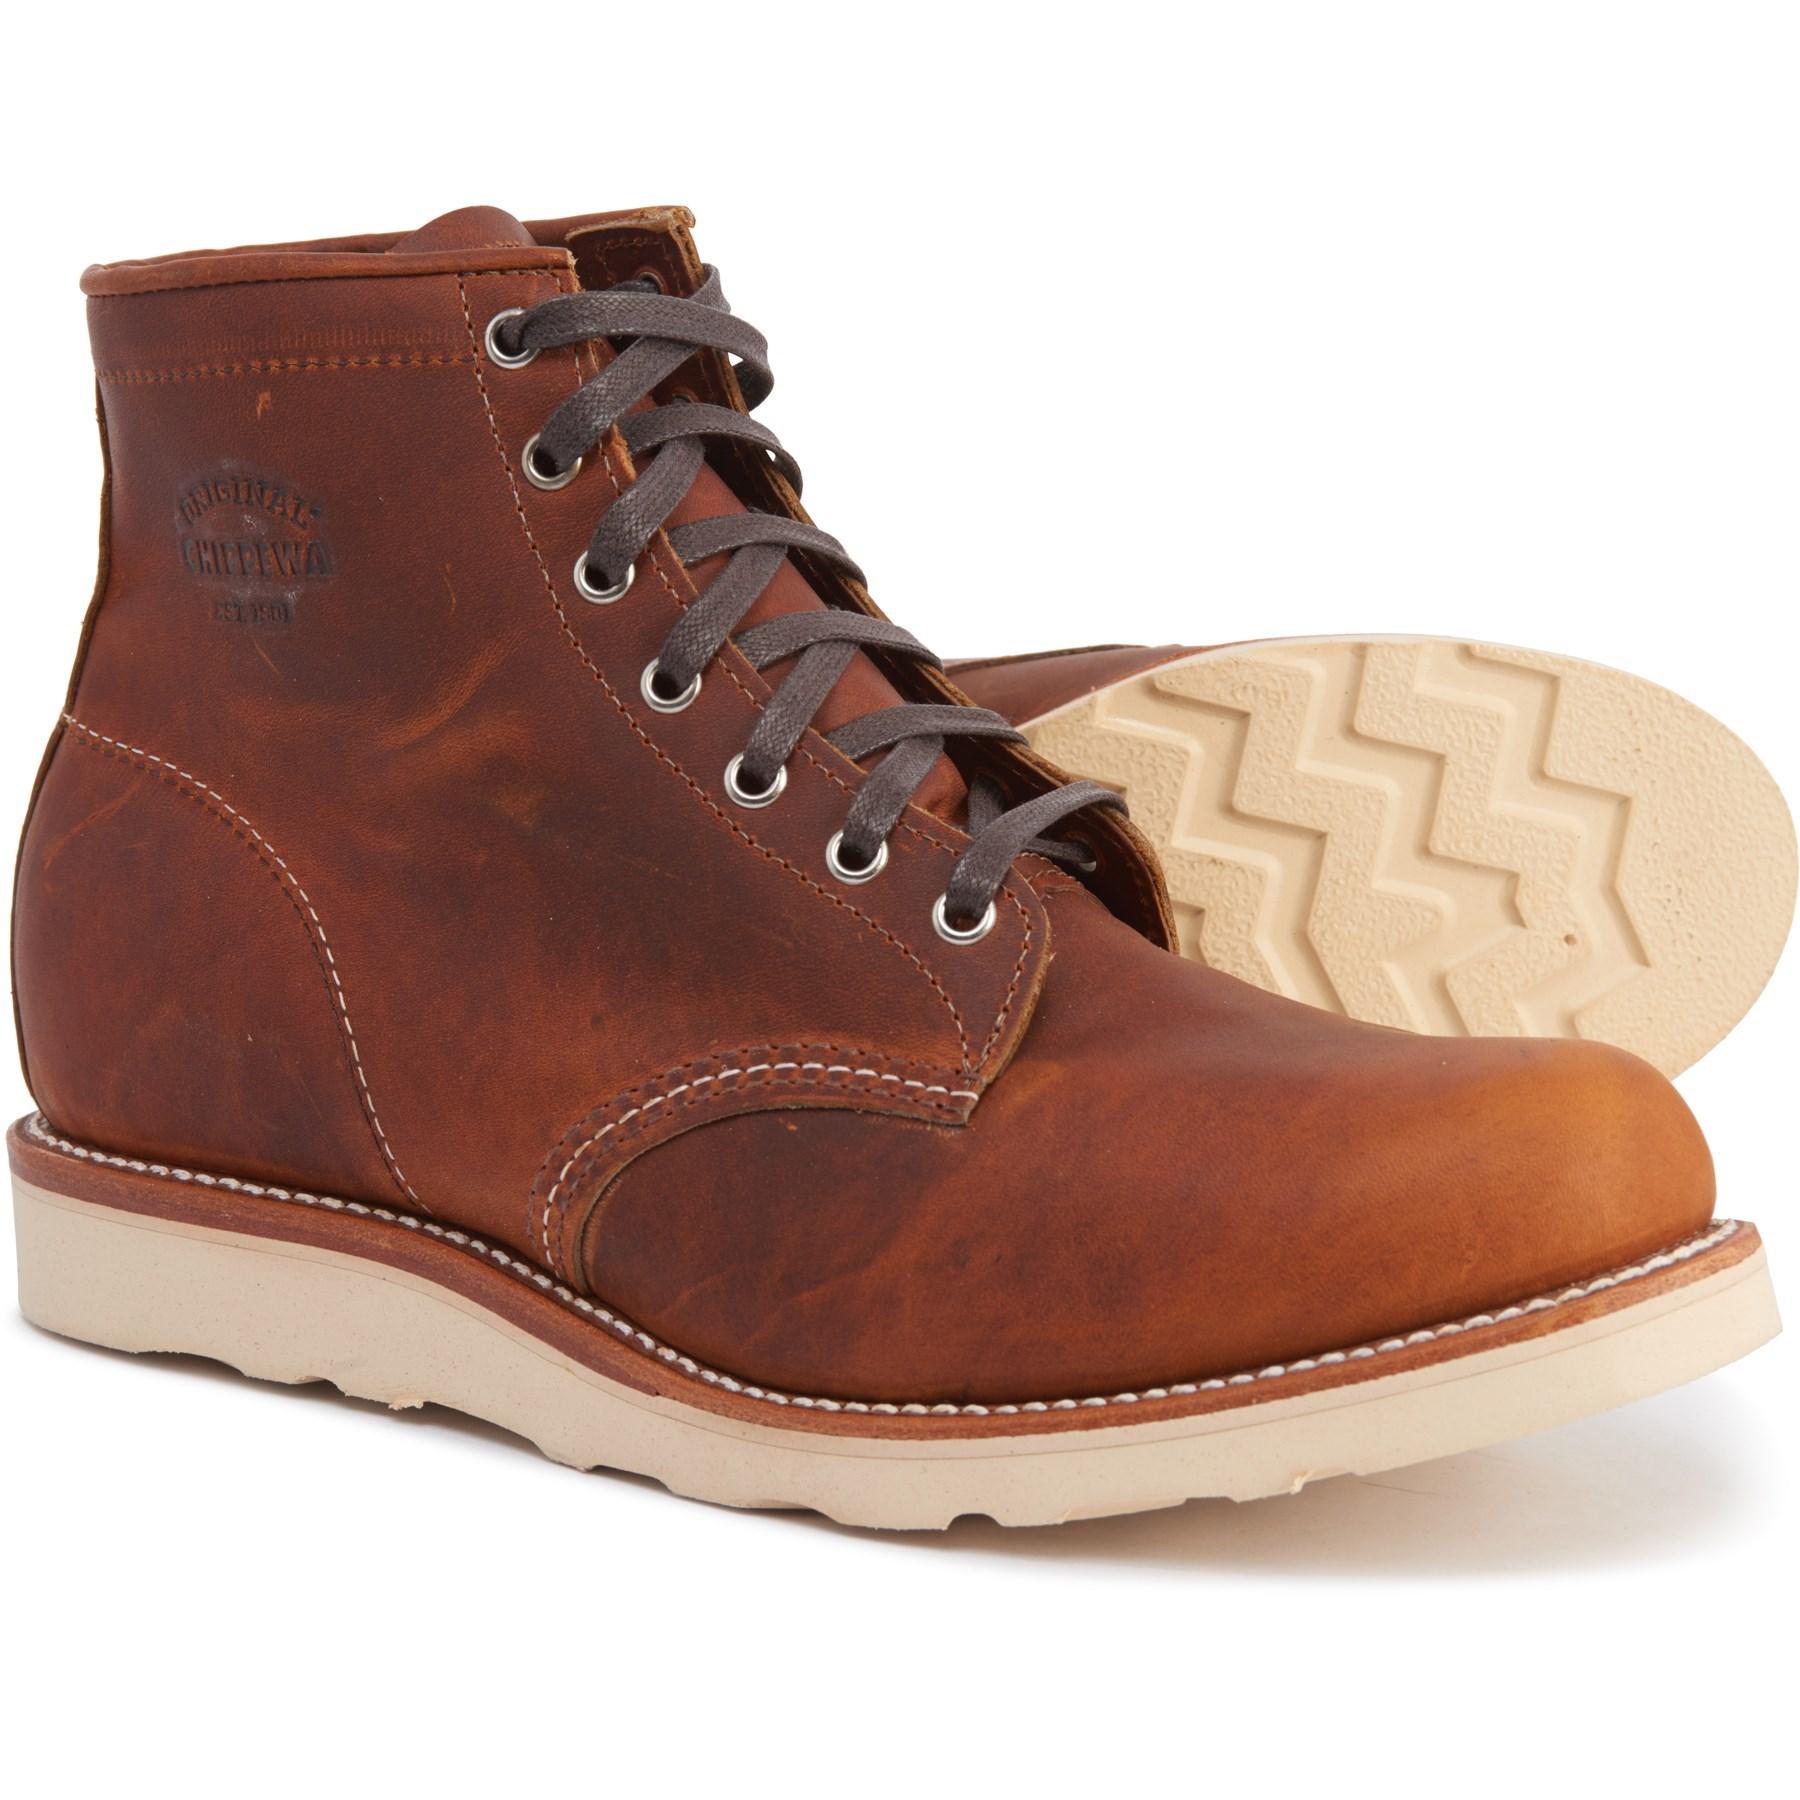 factory seconds timberland boots